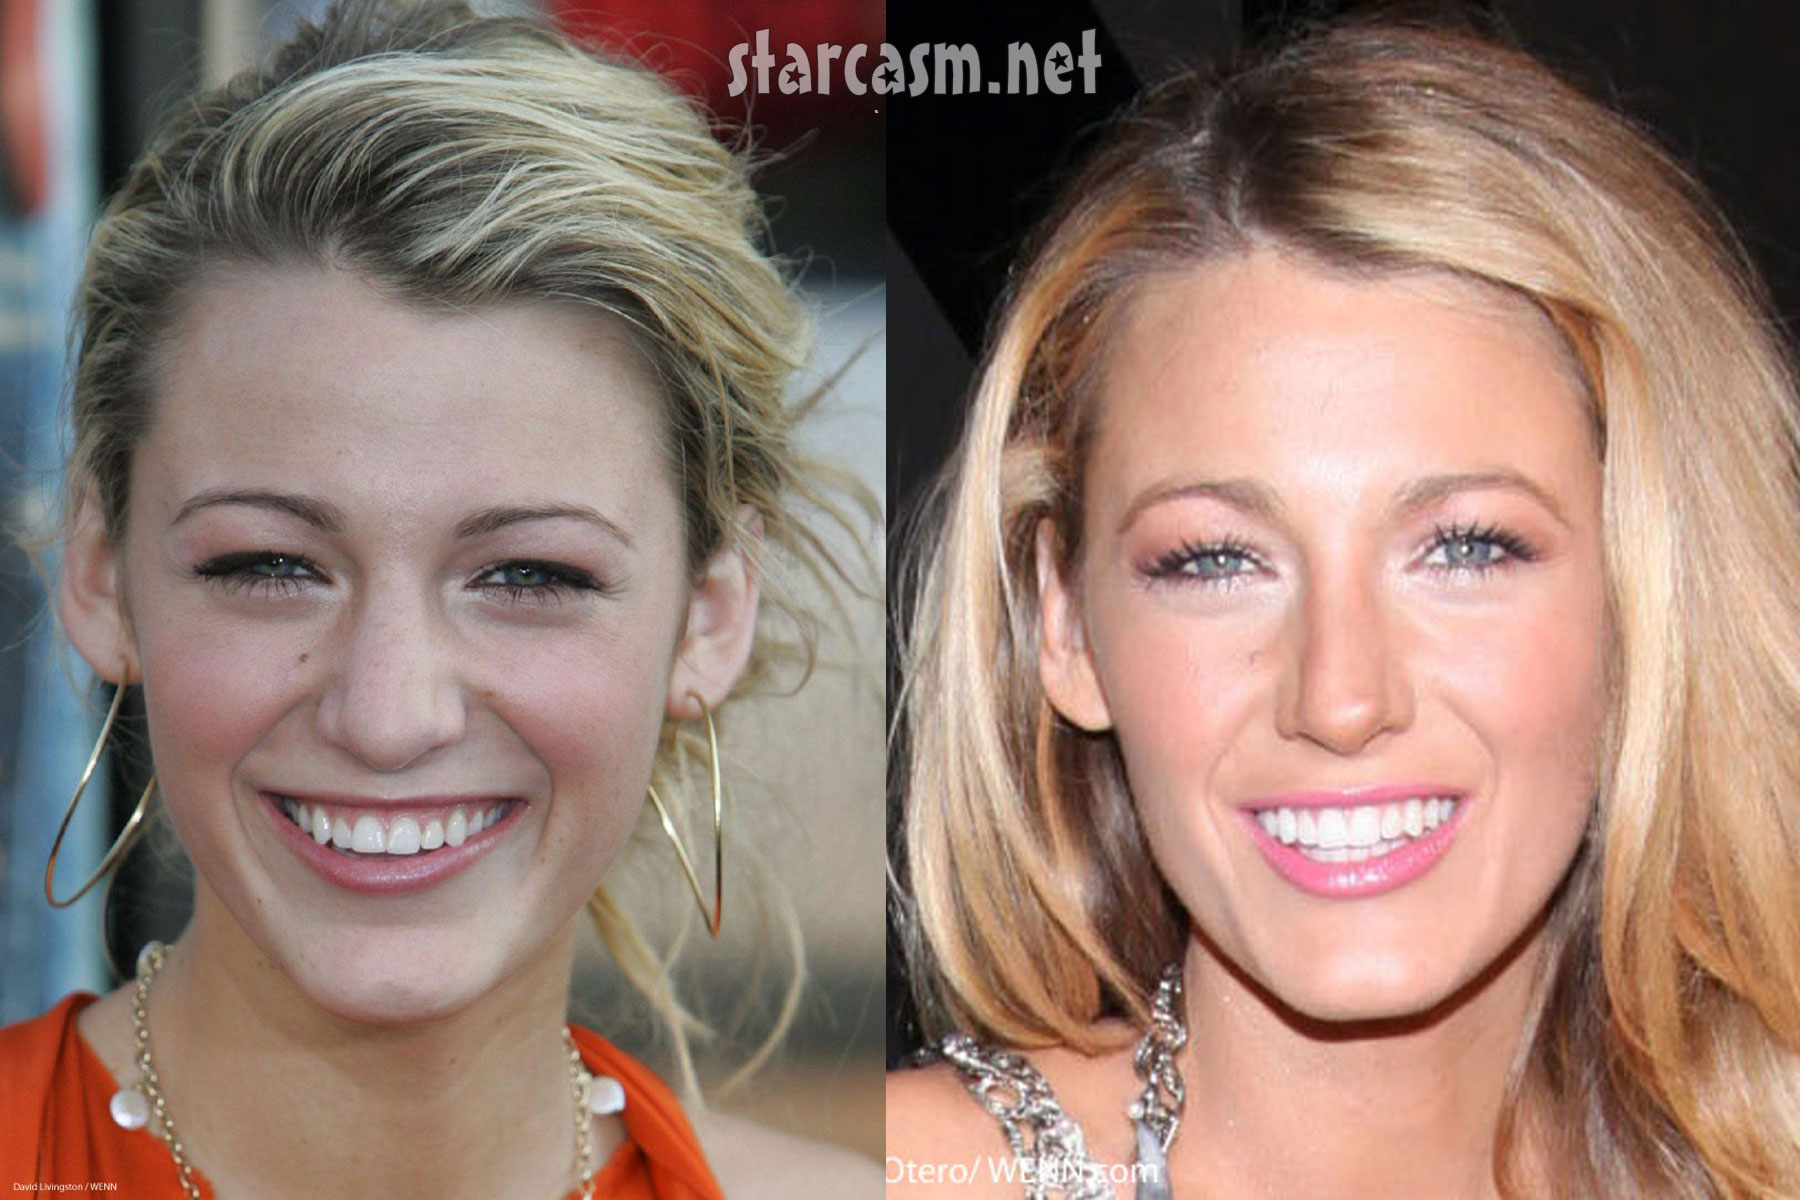 Blake Lively's nose job before and after plastic surgery photos